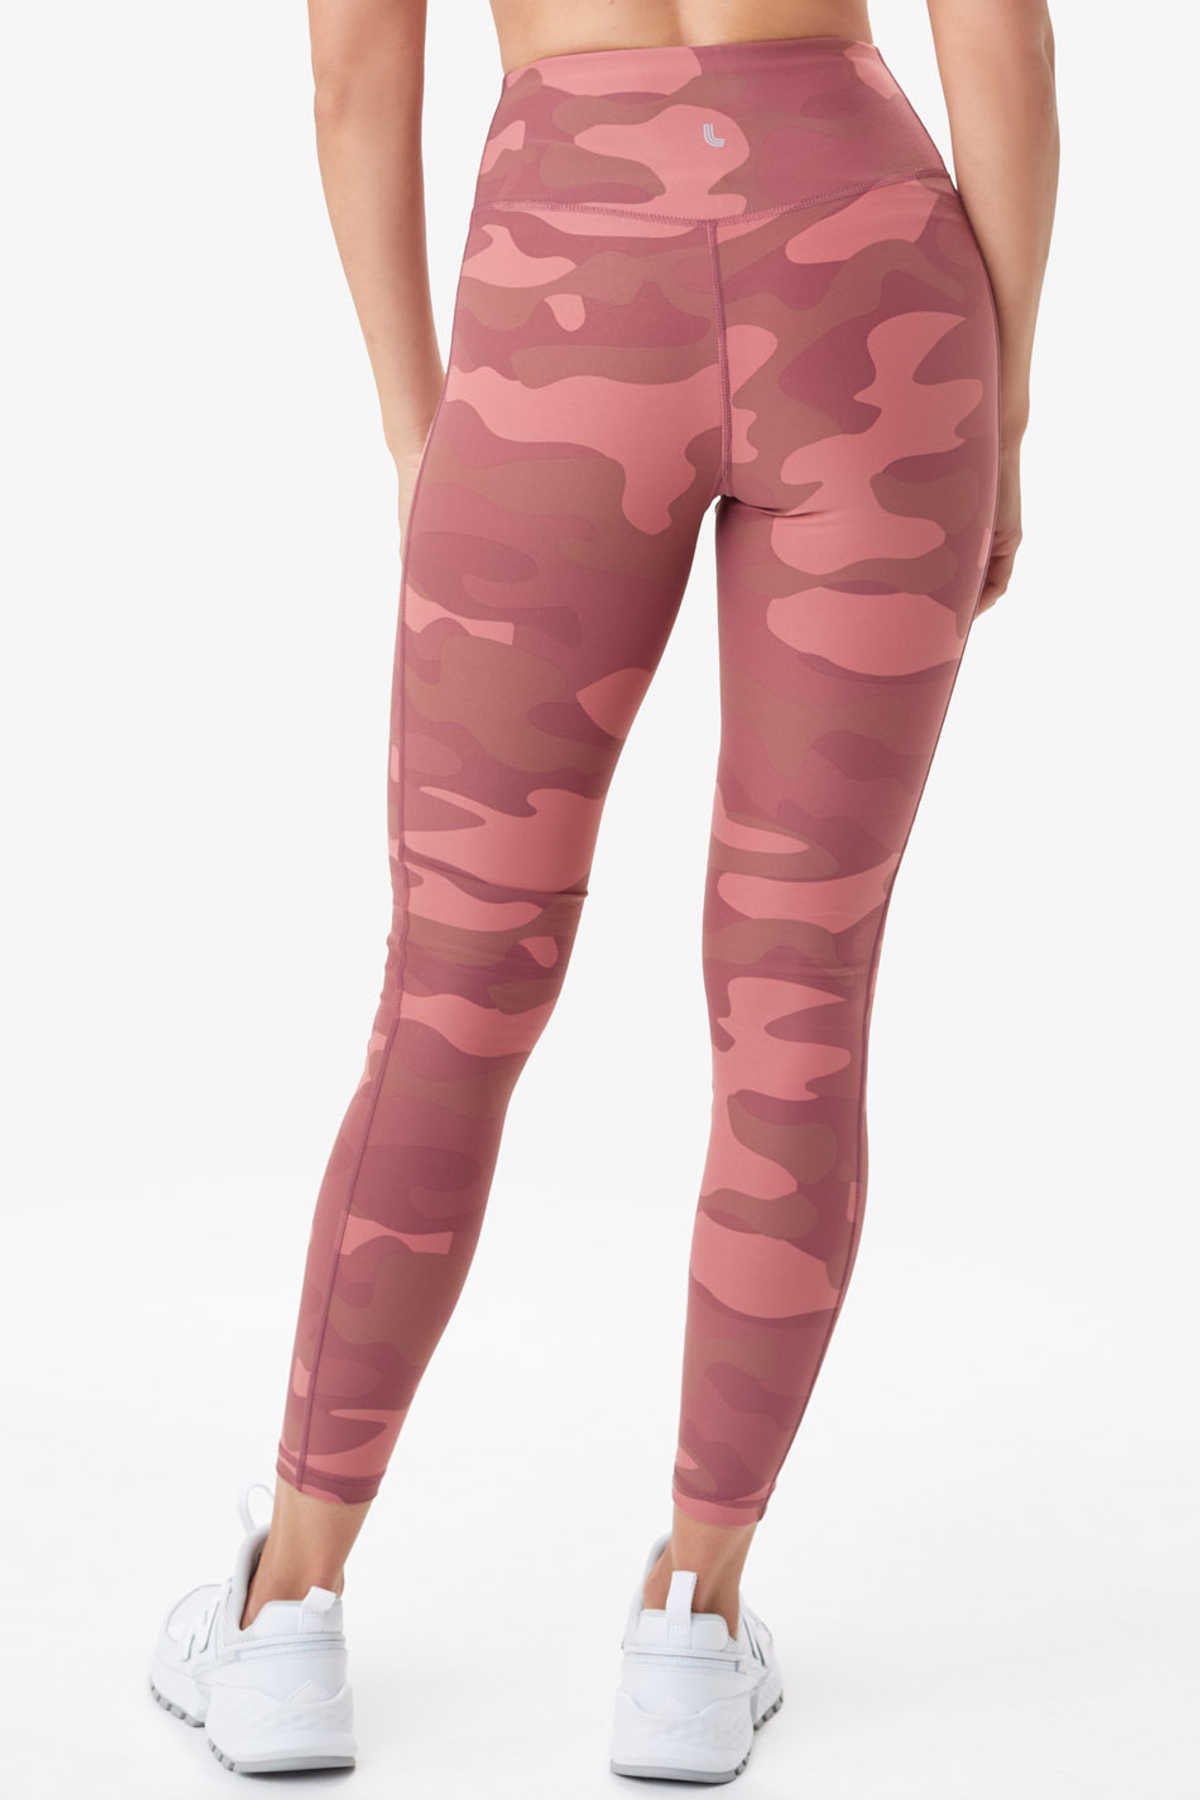 Lululemon Pink Camo Leggings Size XS - $55 (43% Off Retail) - From lianna